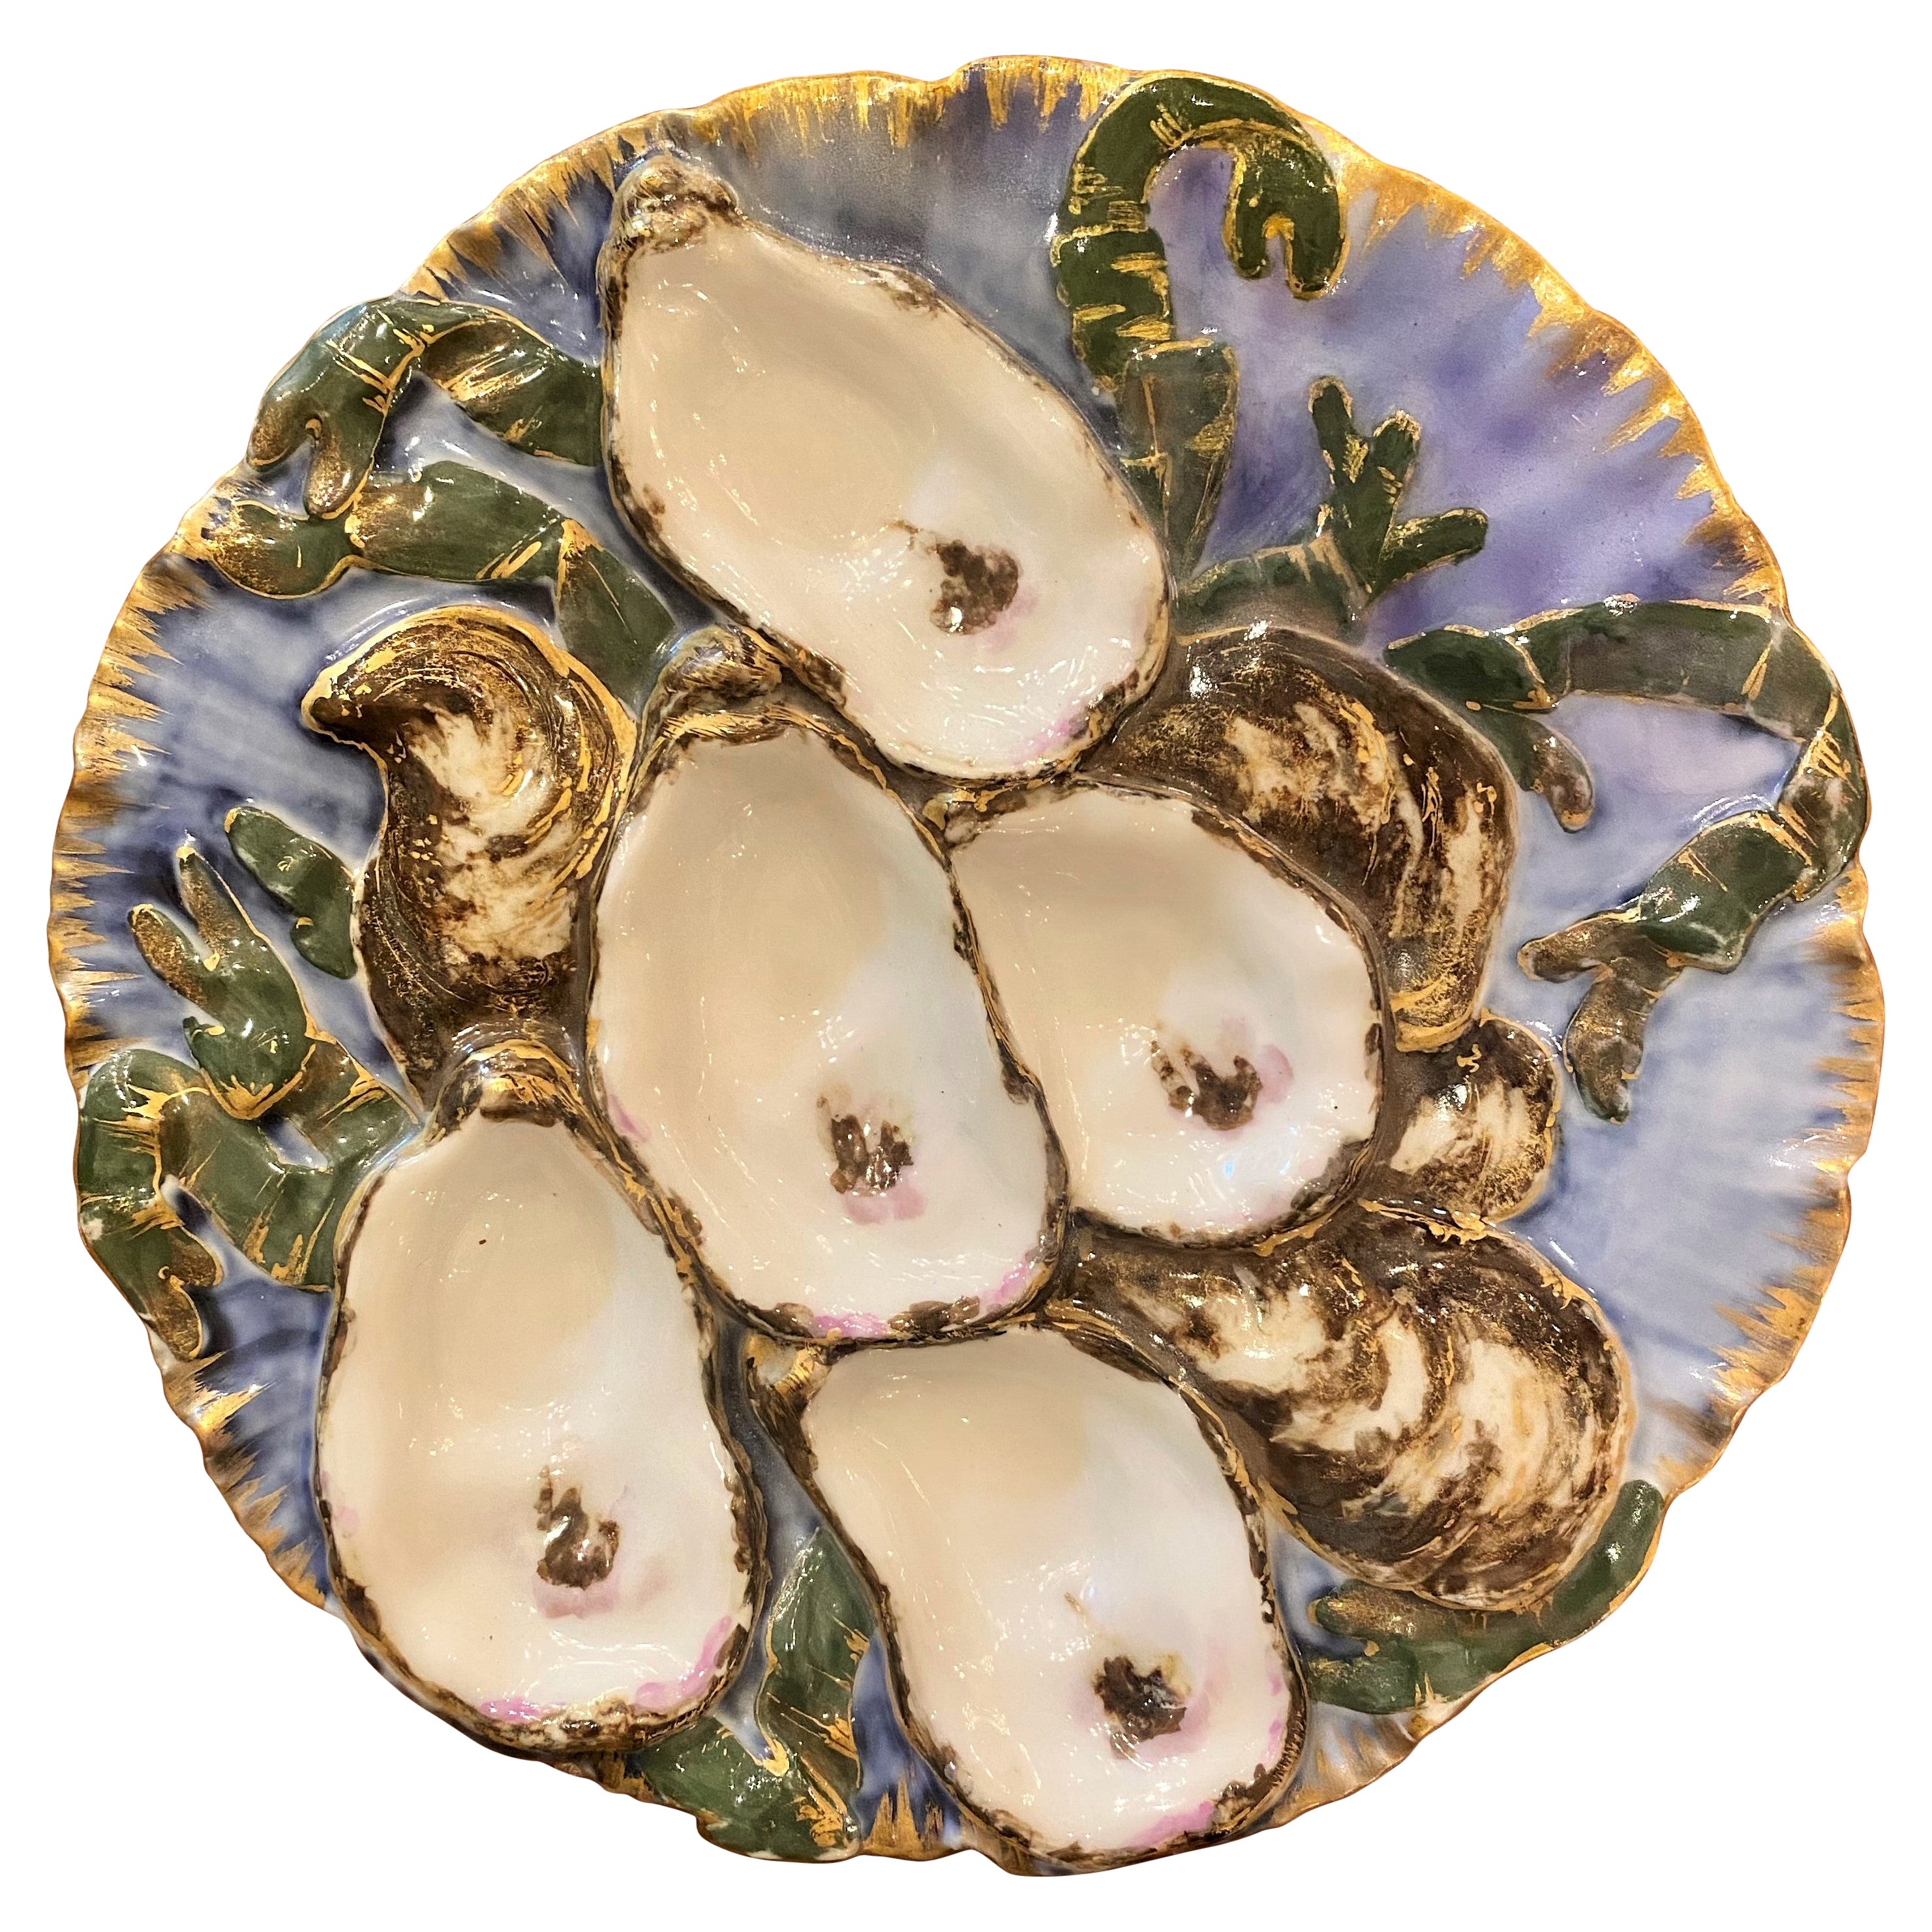 Antique French Limoges Porcelain Presidential Oyster Plate, Circa 1880-1890